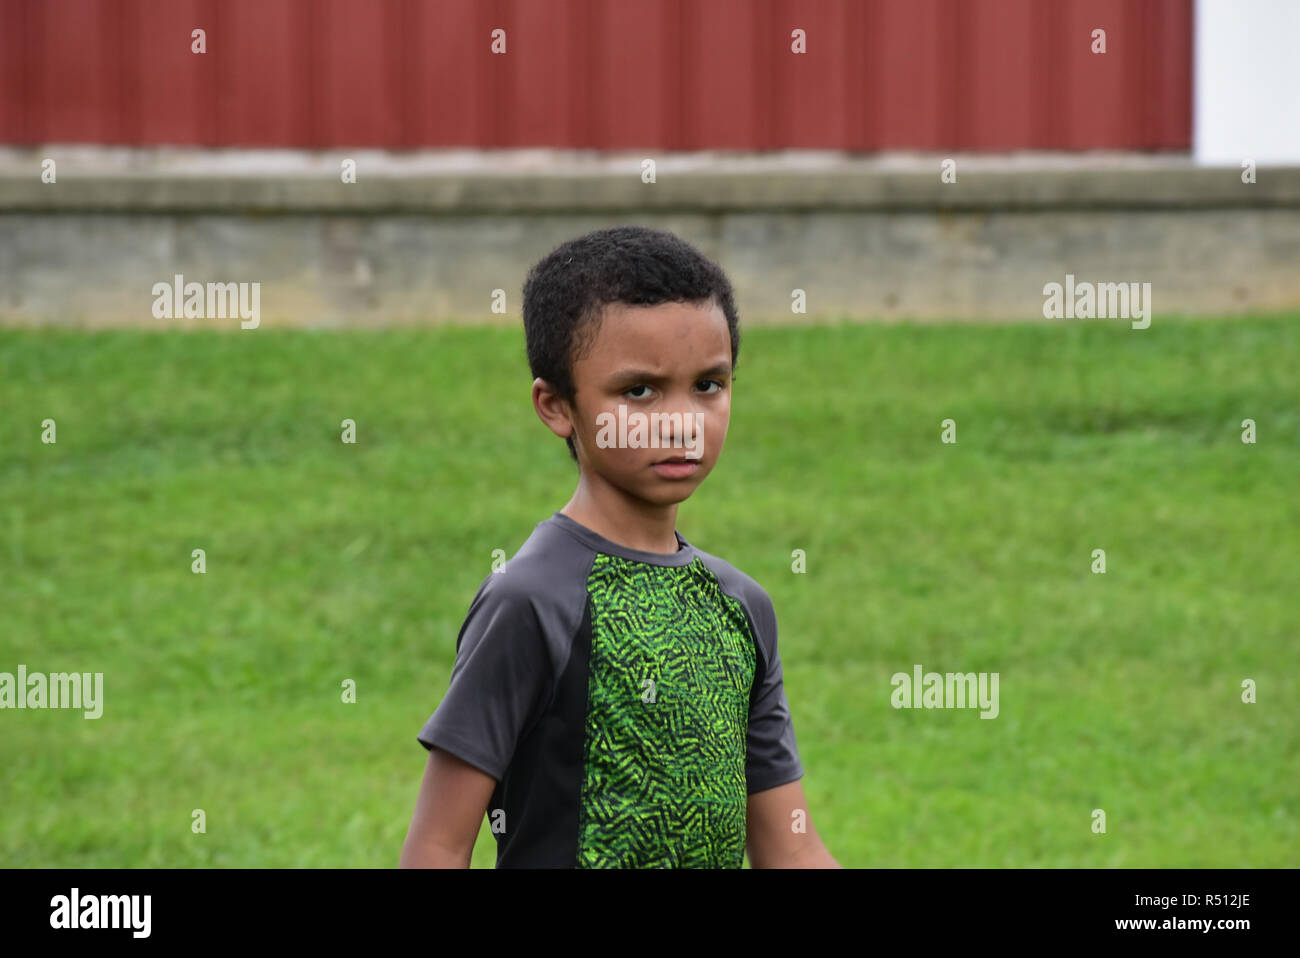 Irritated young boy Stock Photo